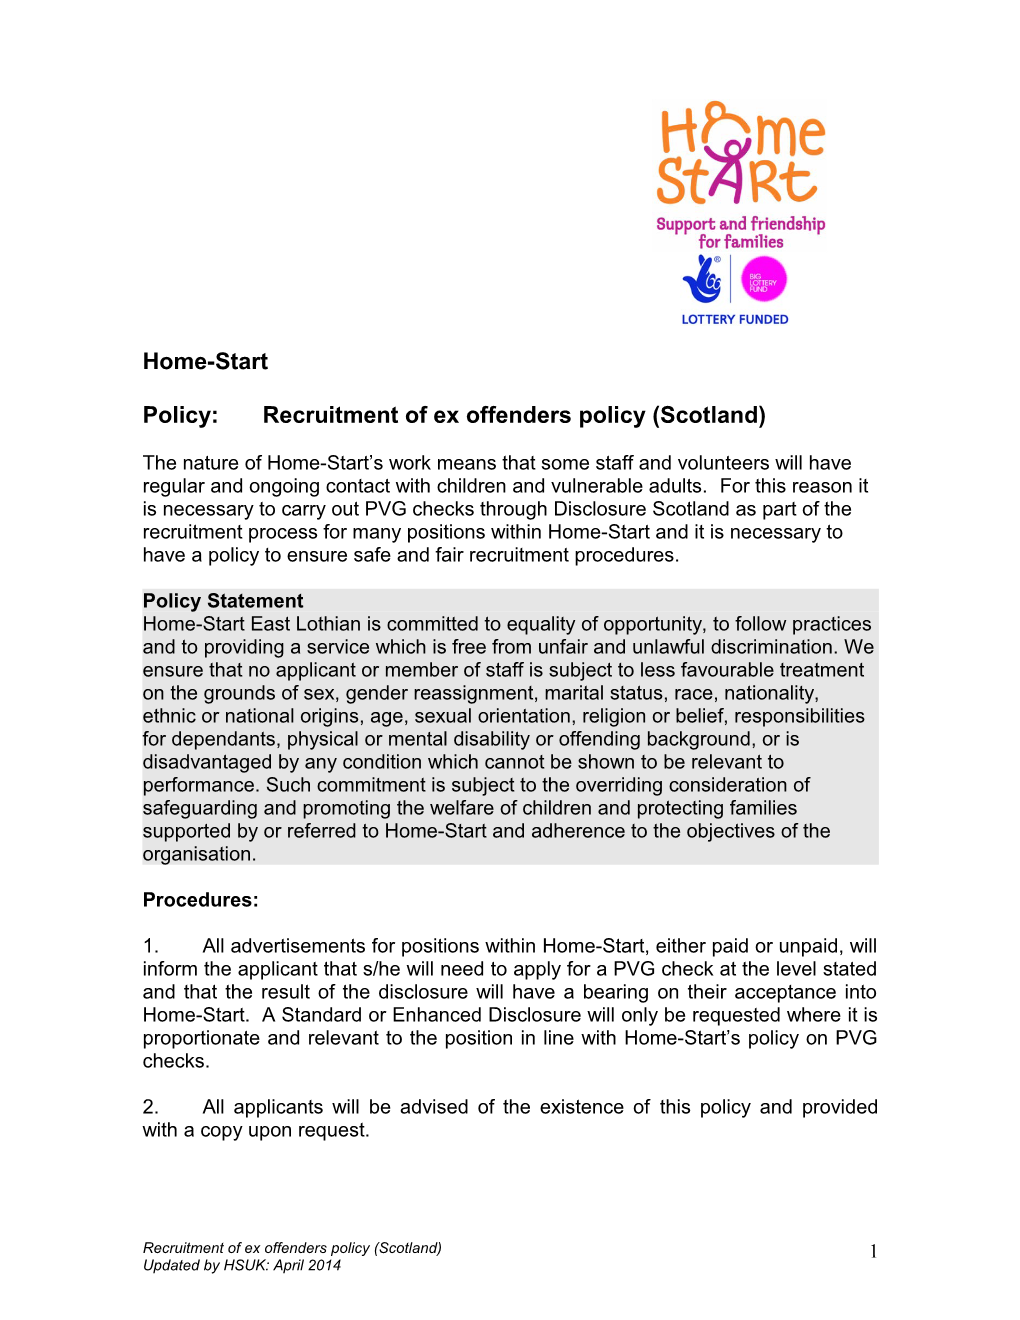 Policy:Recruitment of Ex Offenderspolicy (Scotland)